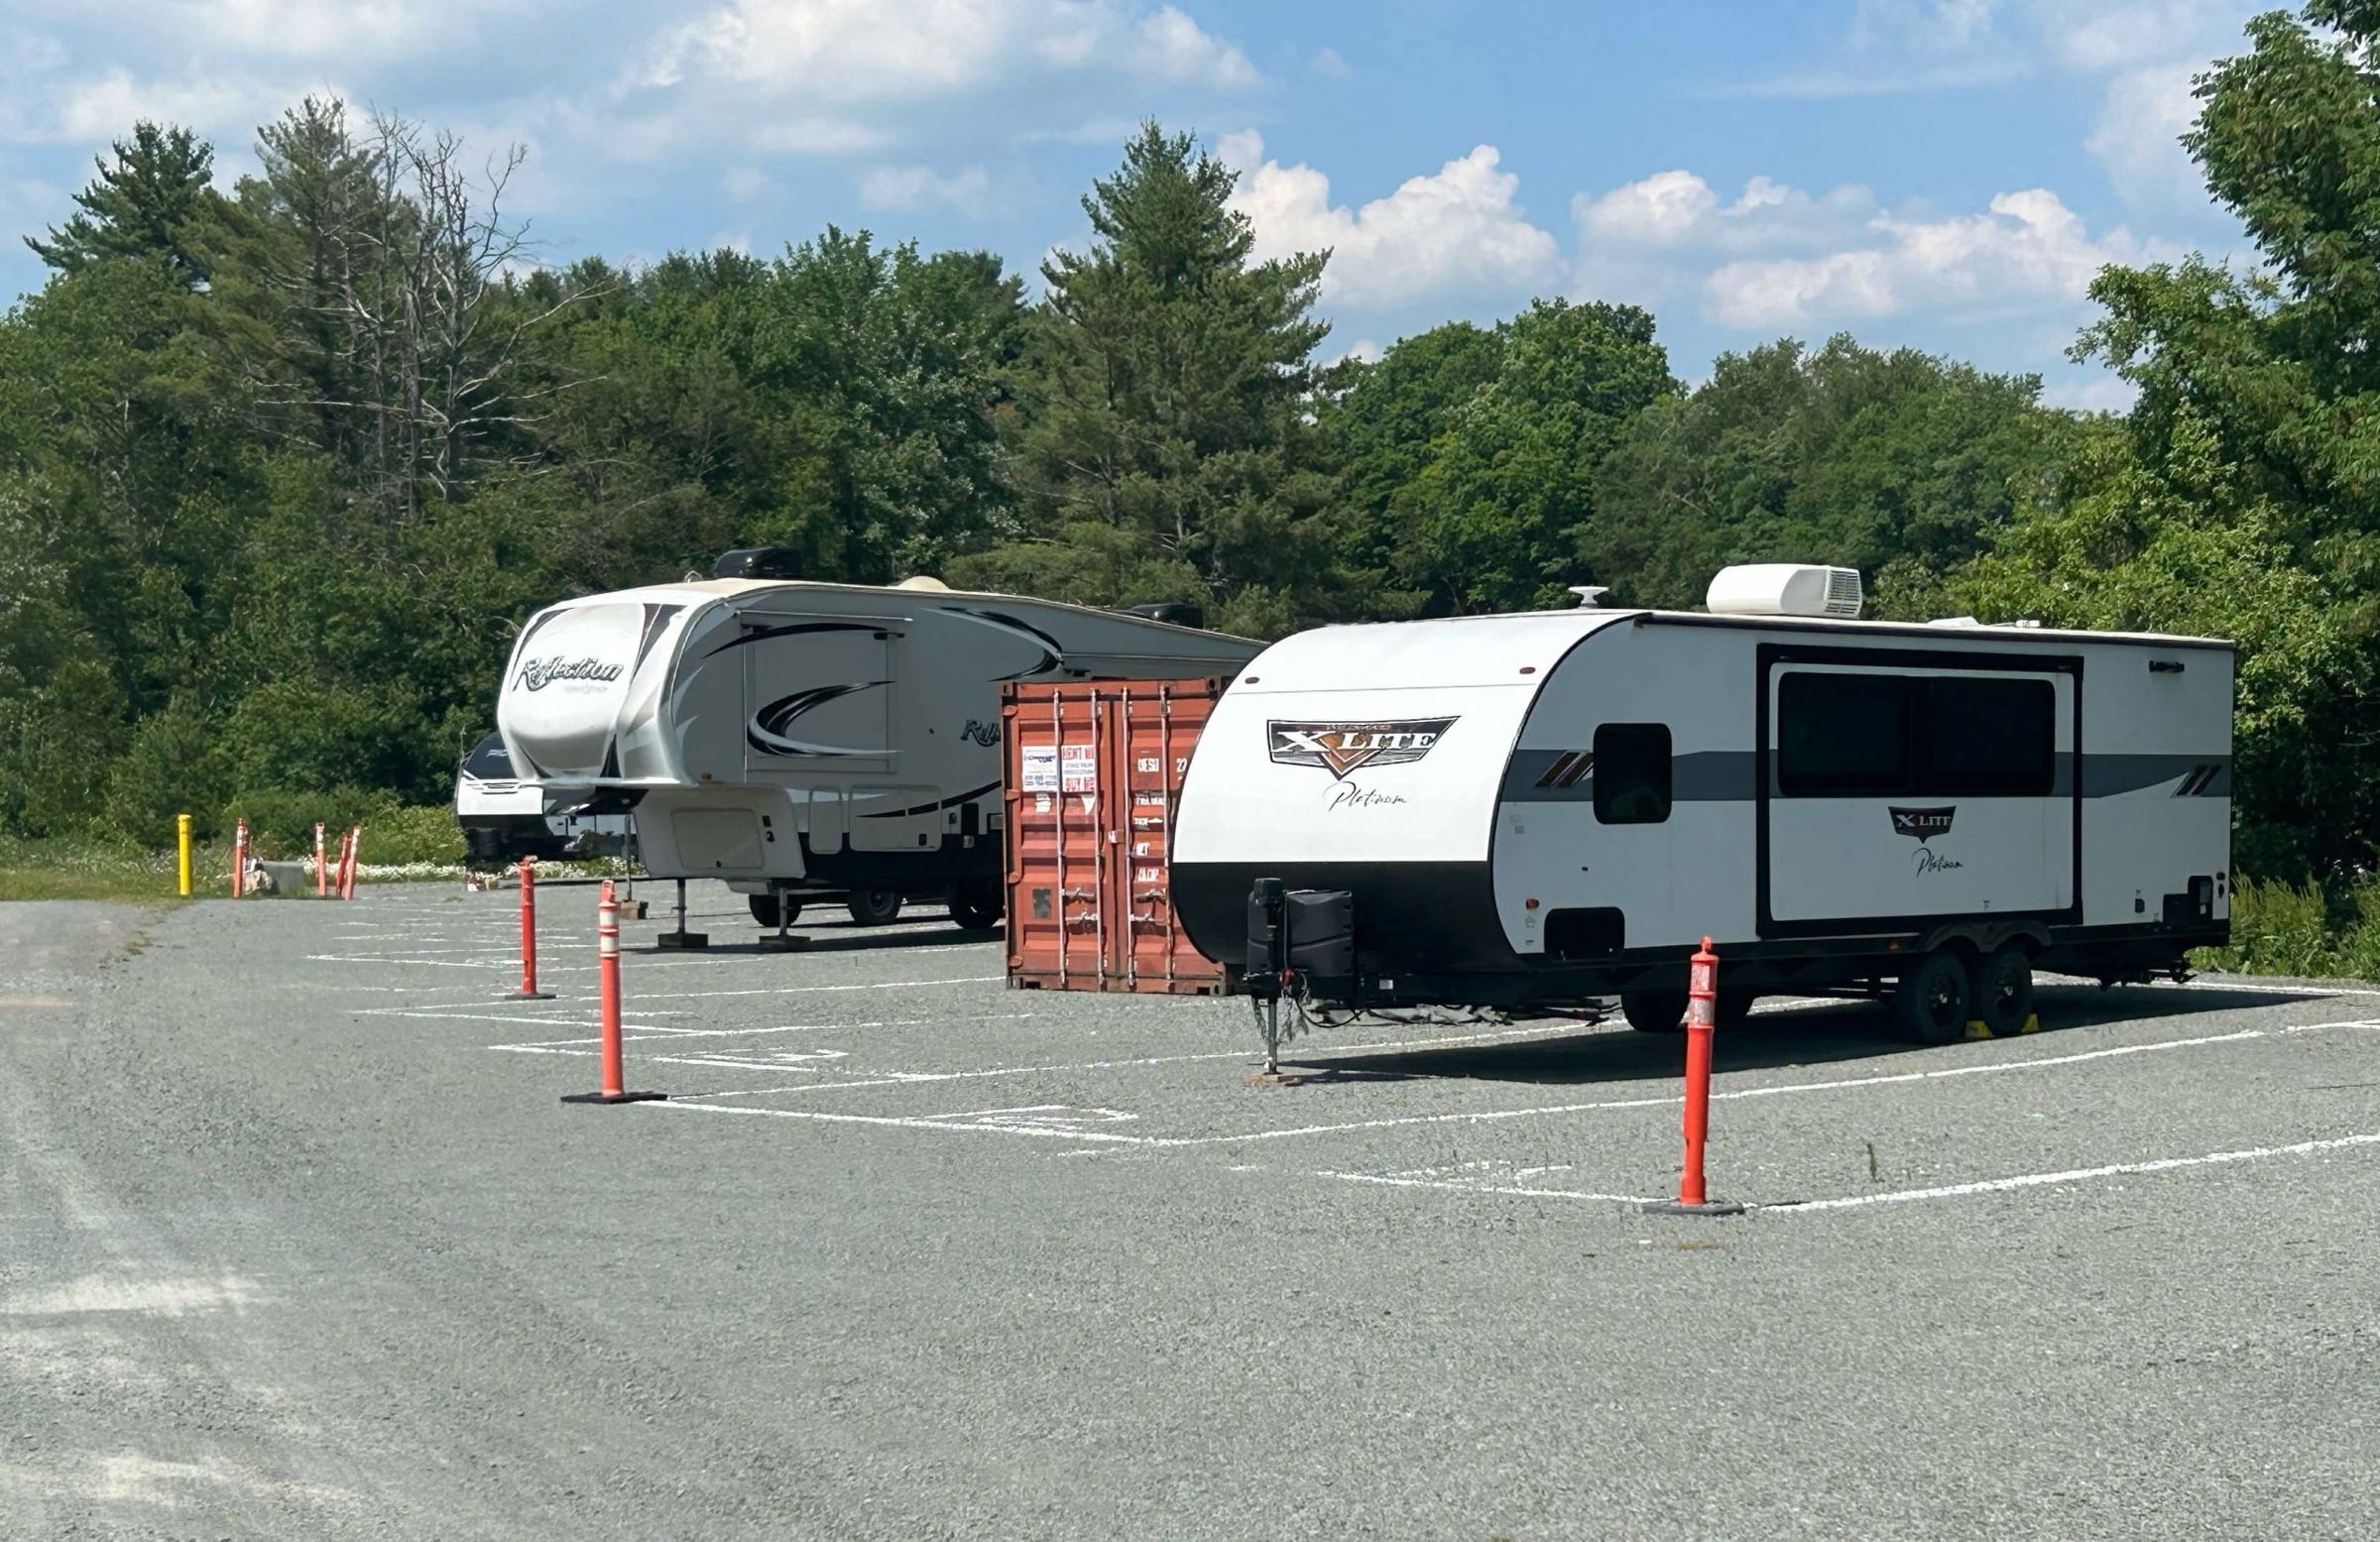 RVs and a shipping containing parked outdoors in their vehicle storage parking lot